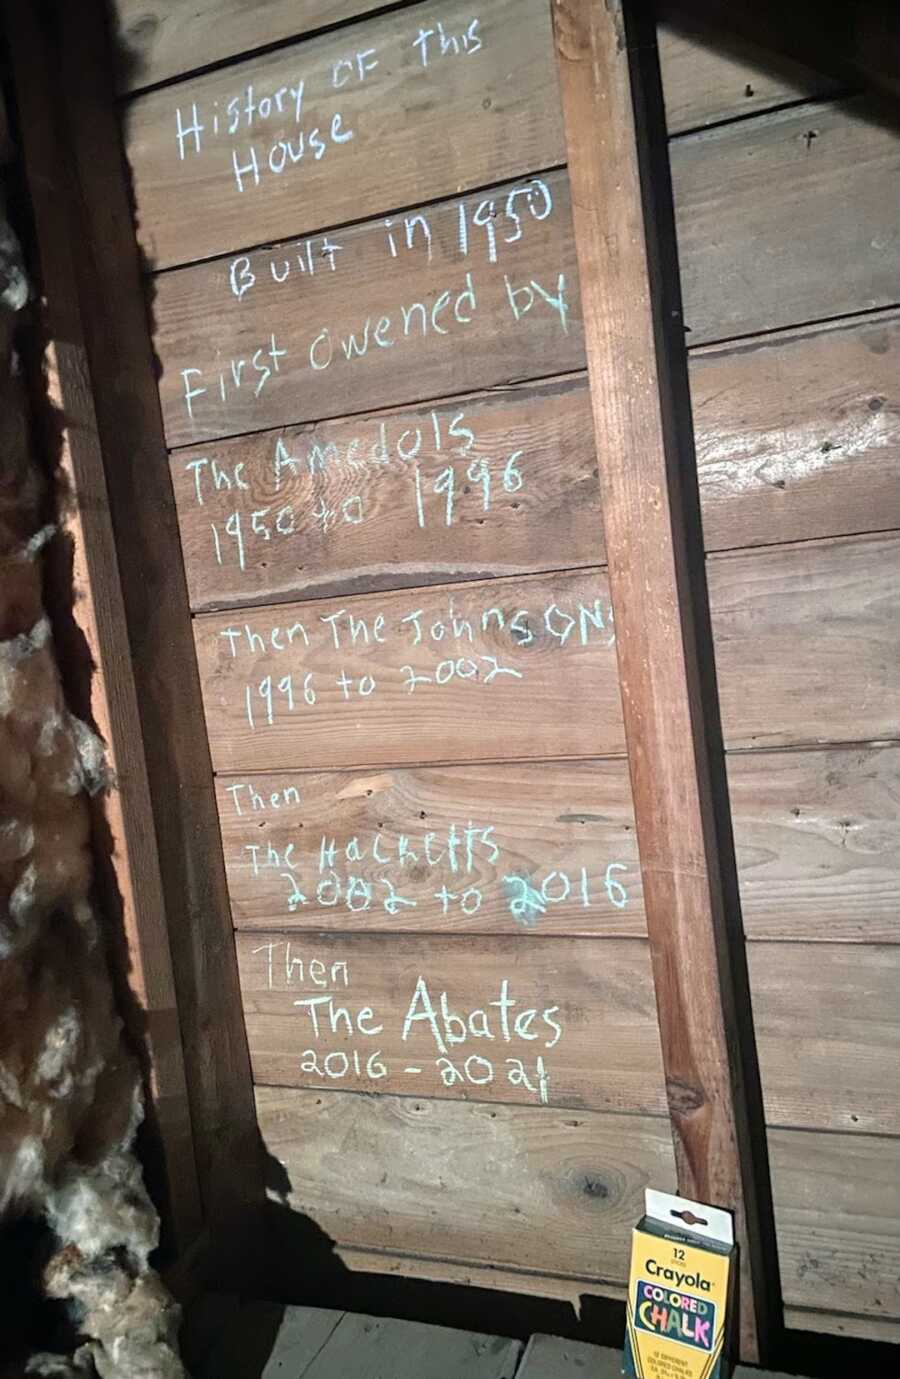 Chalk written on wooden panels listing who lived in the home and what years